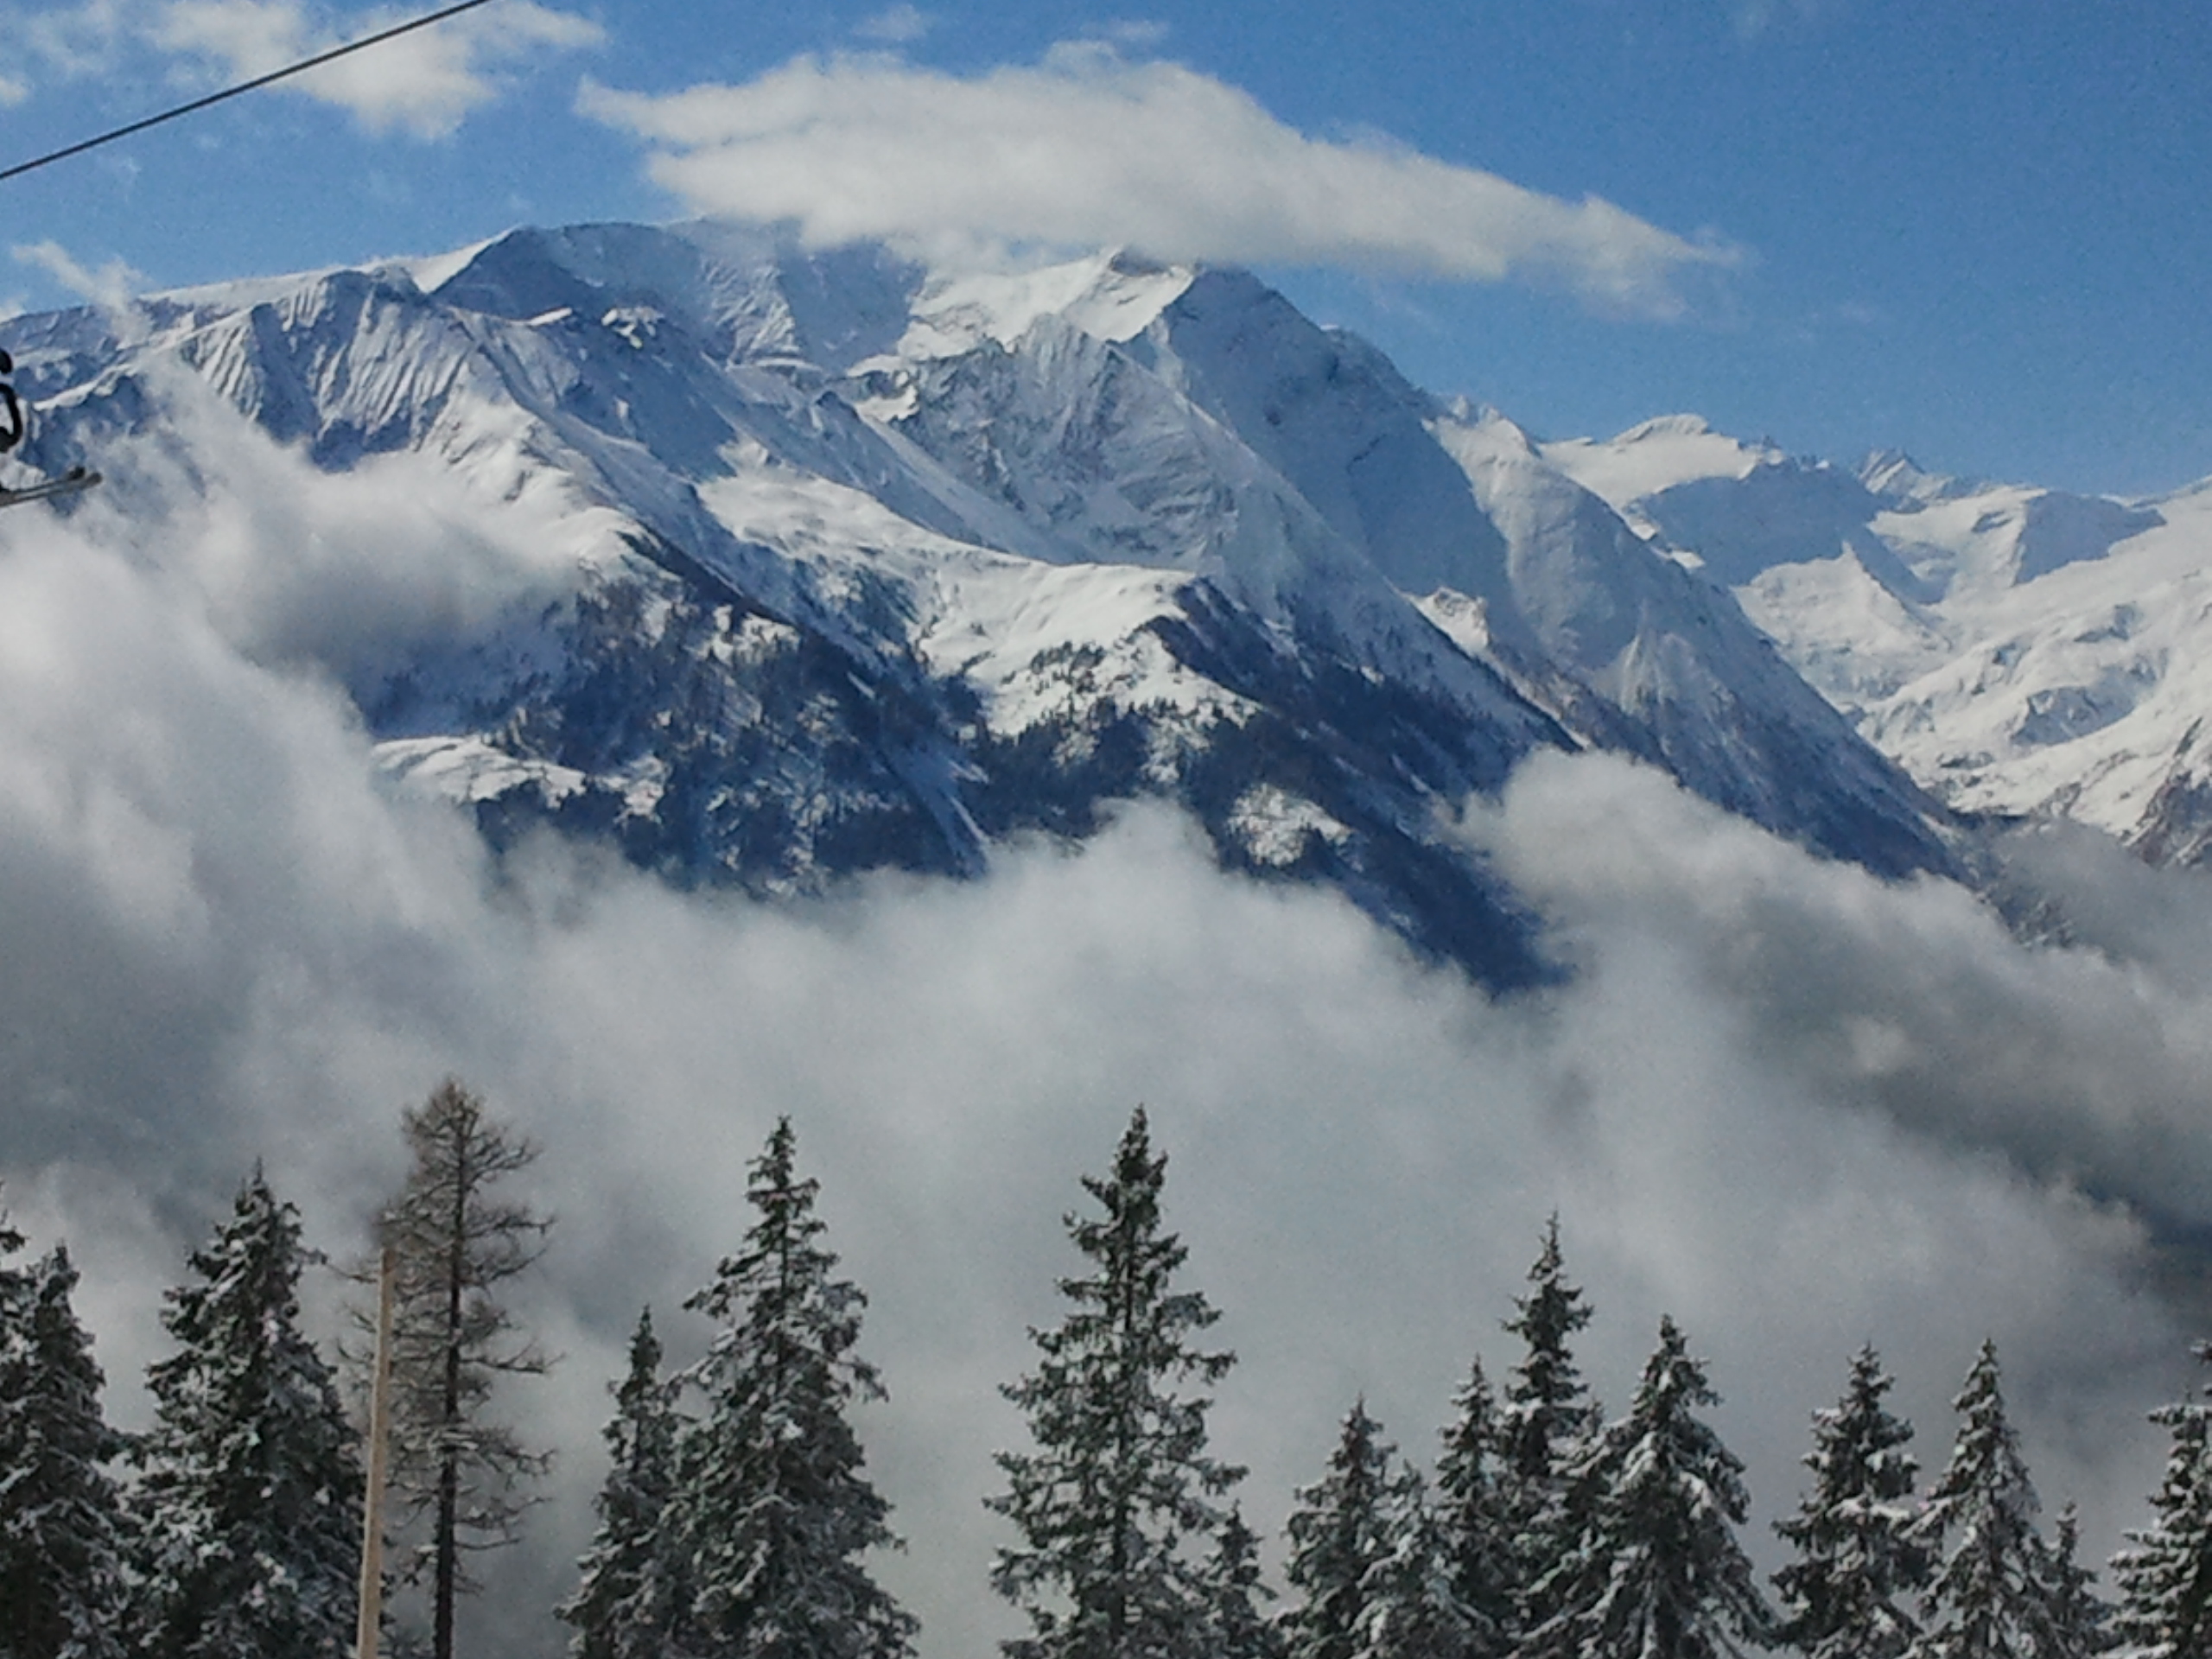 Up above the clouds, Zell am See